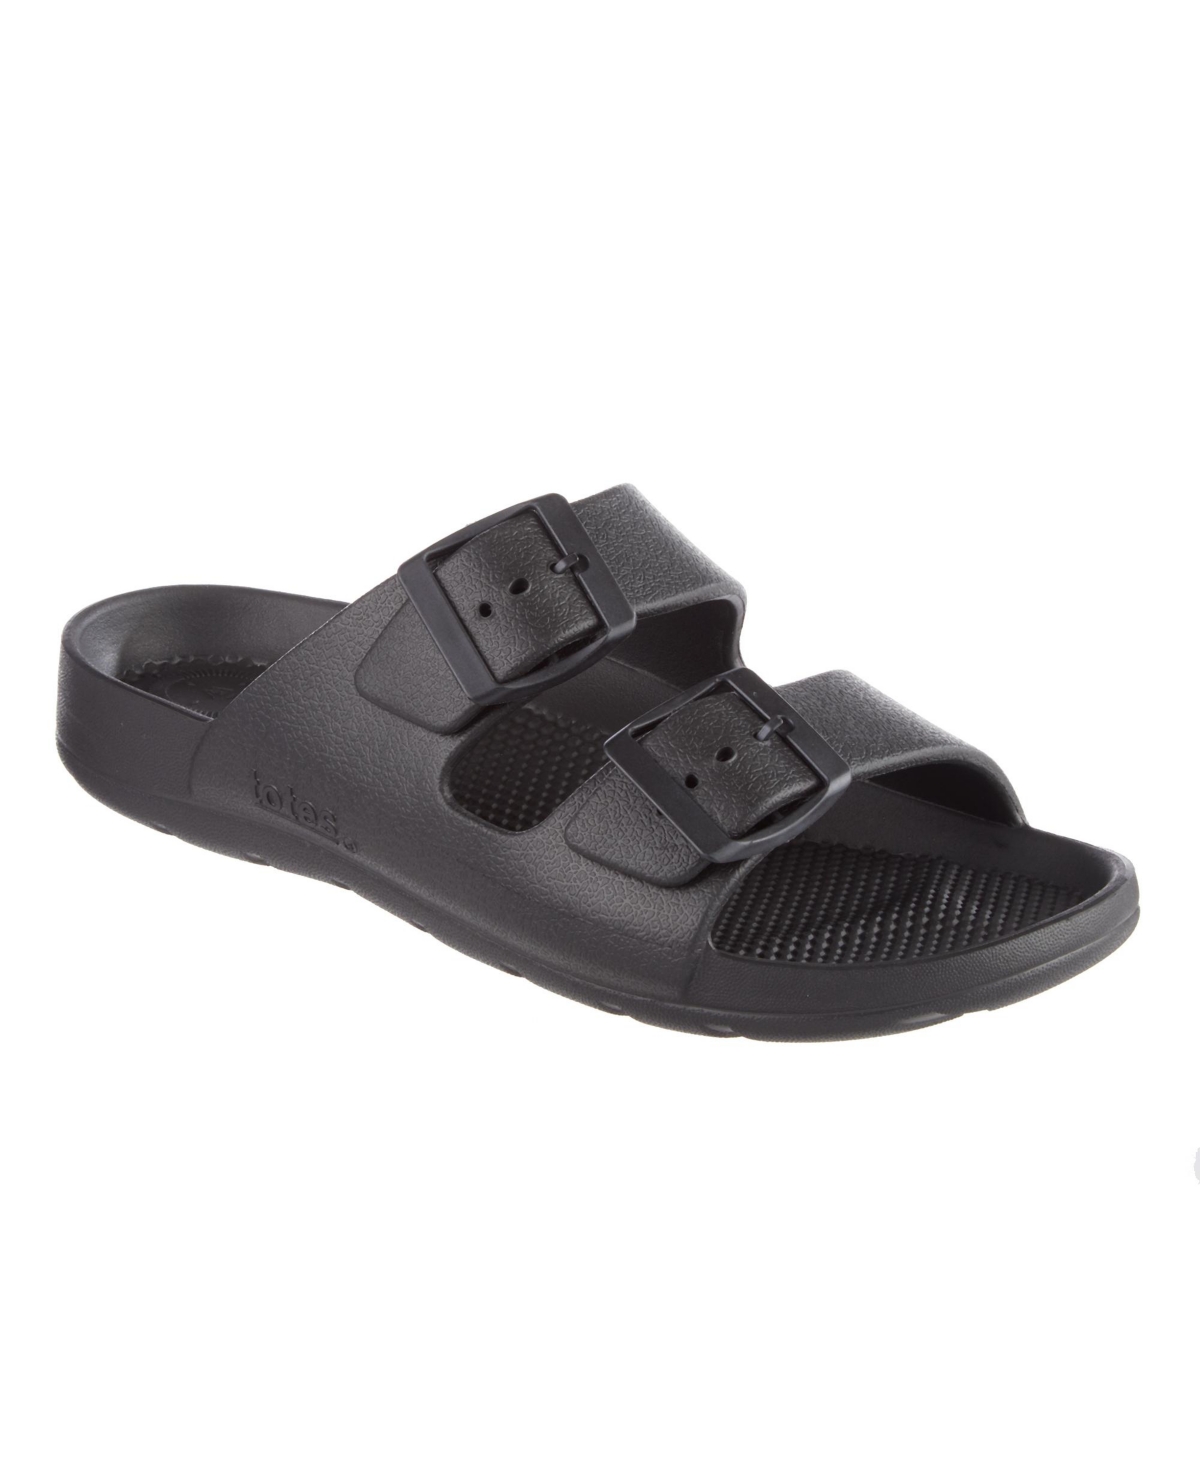 Totes Women's Double Buckle Adjustable Slide With Everywear In Black